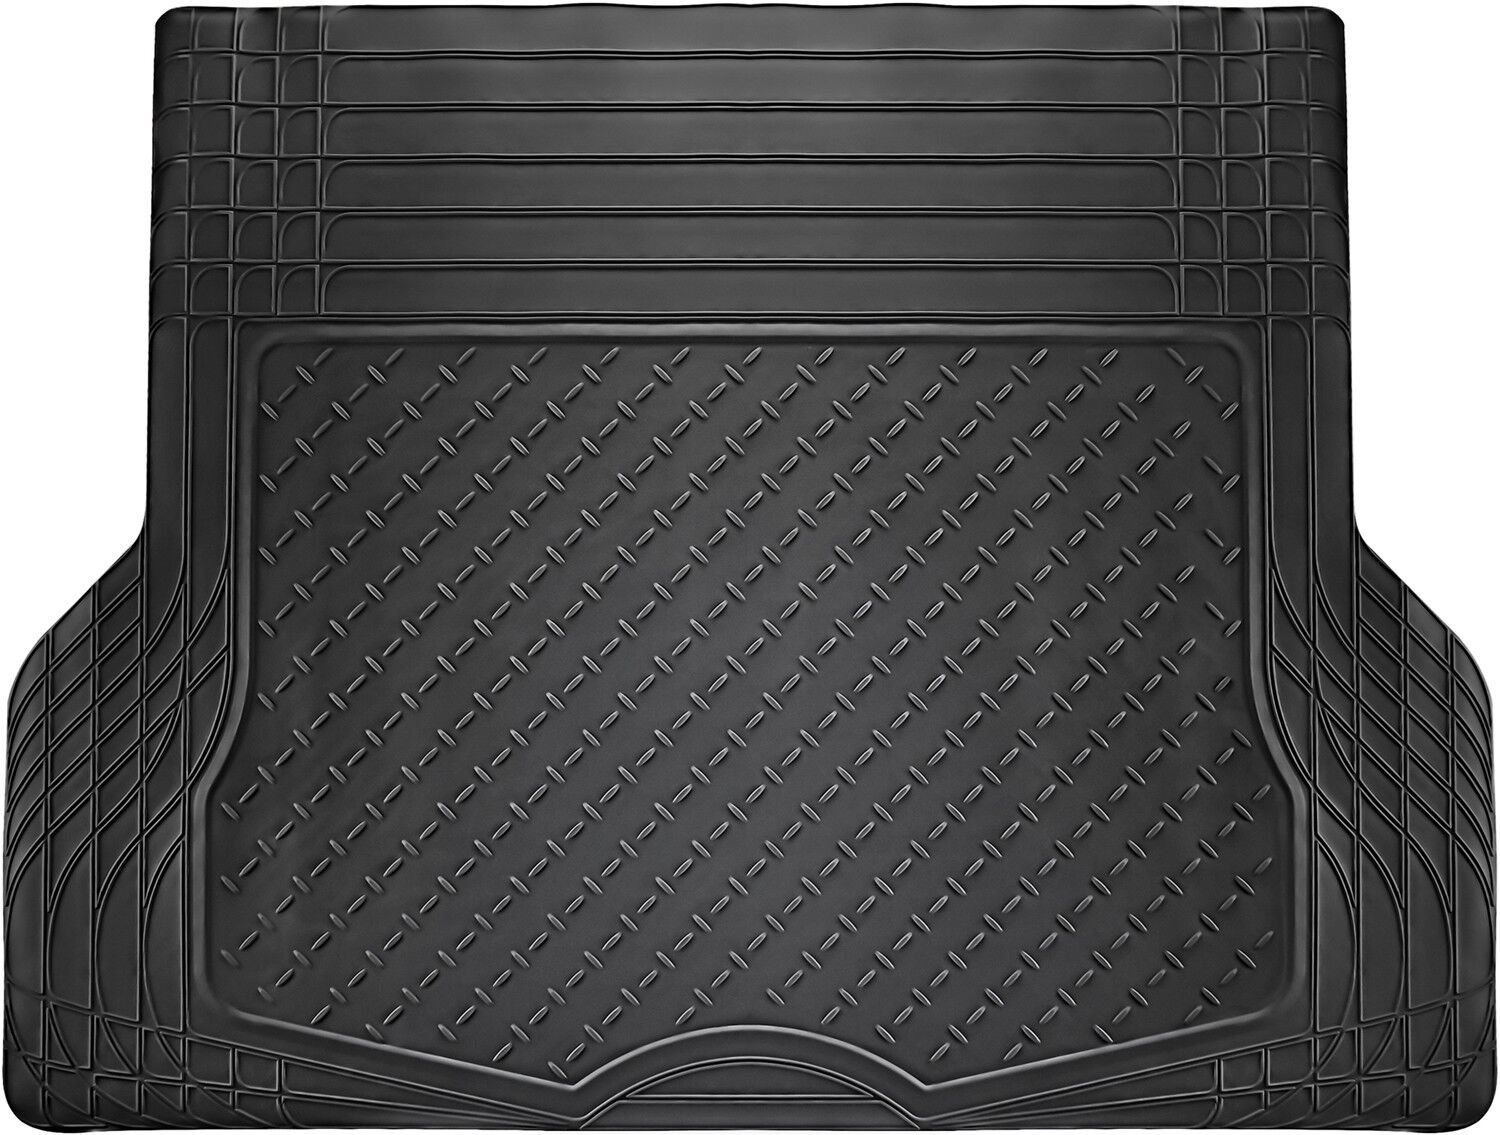 Trunk Cargo Floor Mats for Cars All Weather Rubber Black Heavy Duty Auto Liners